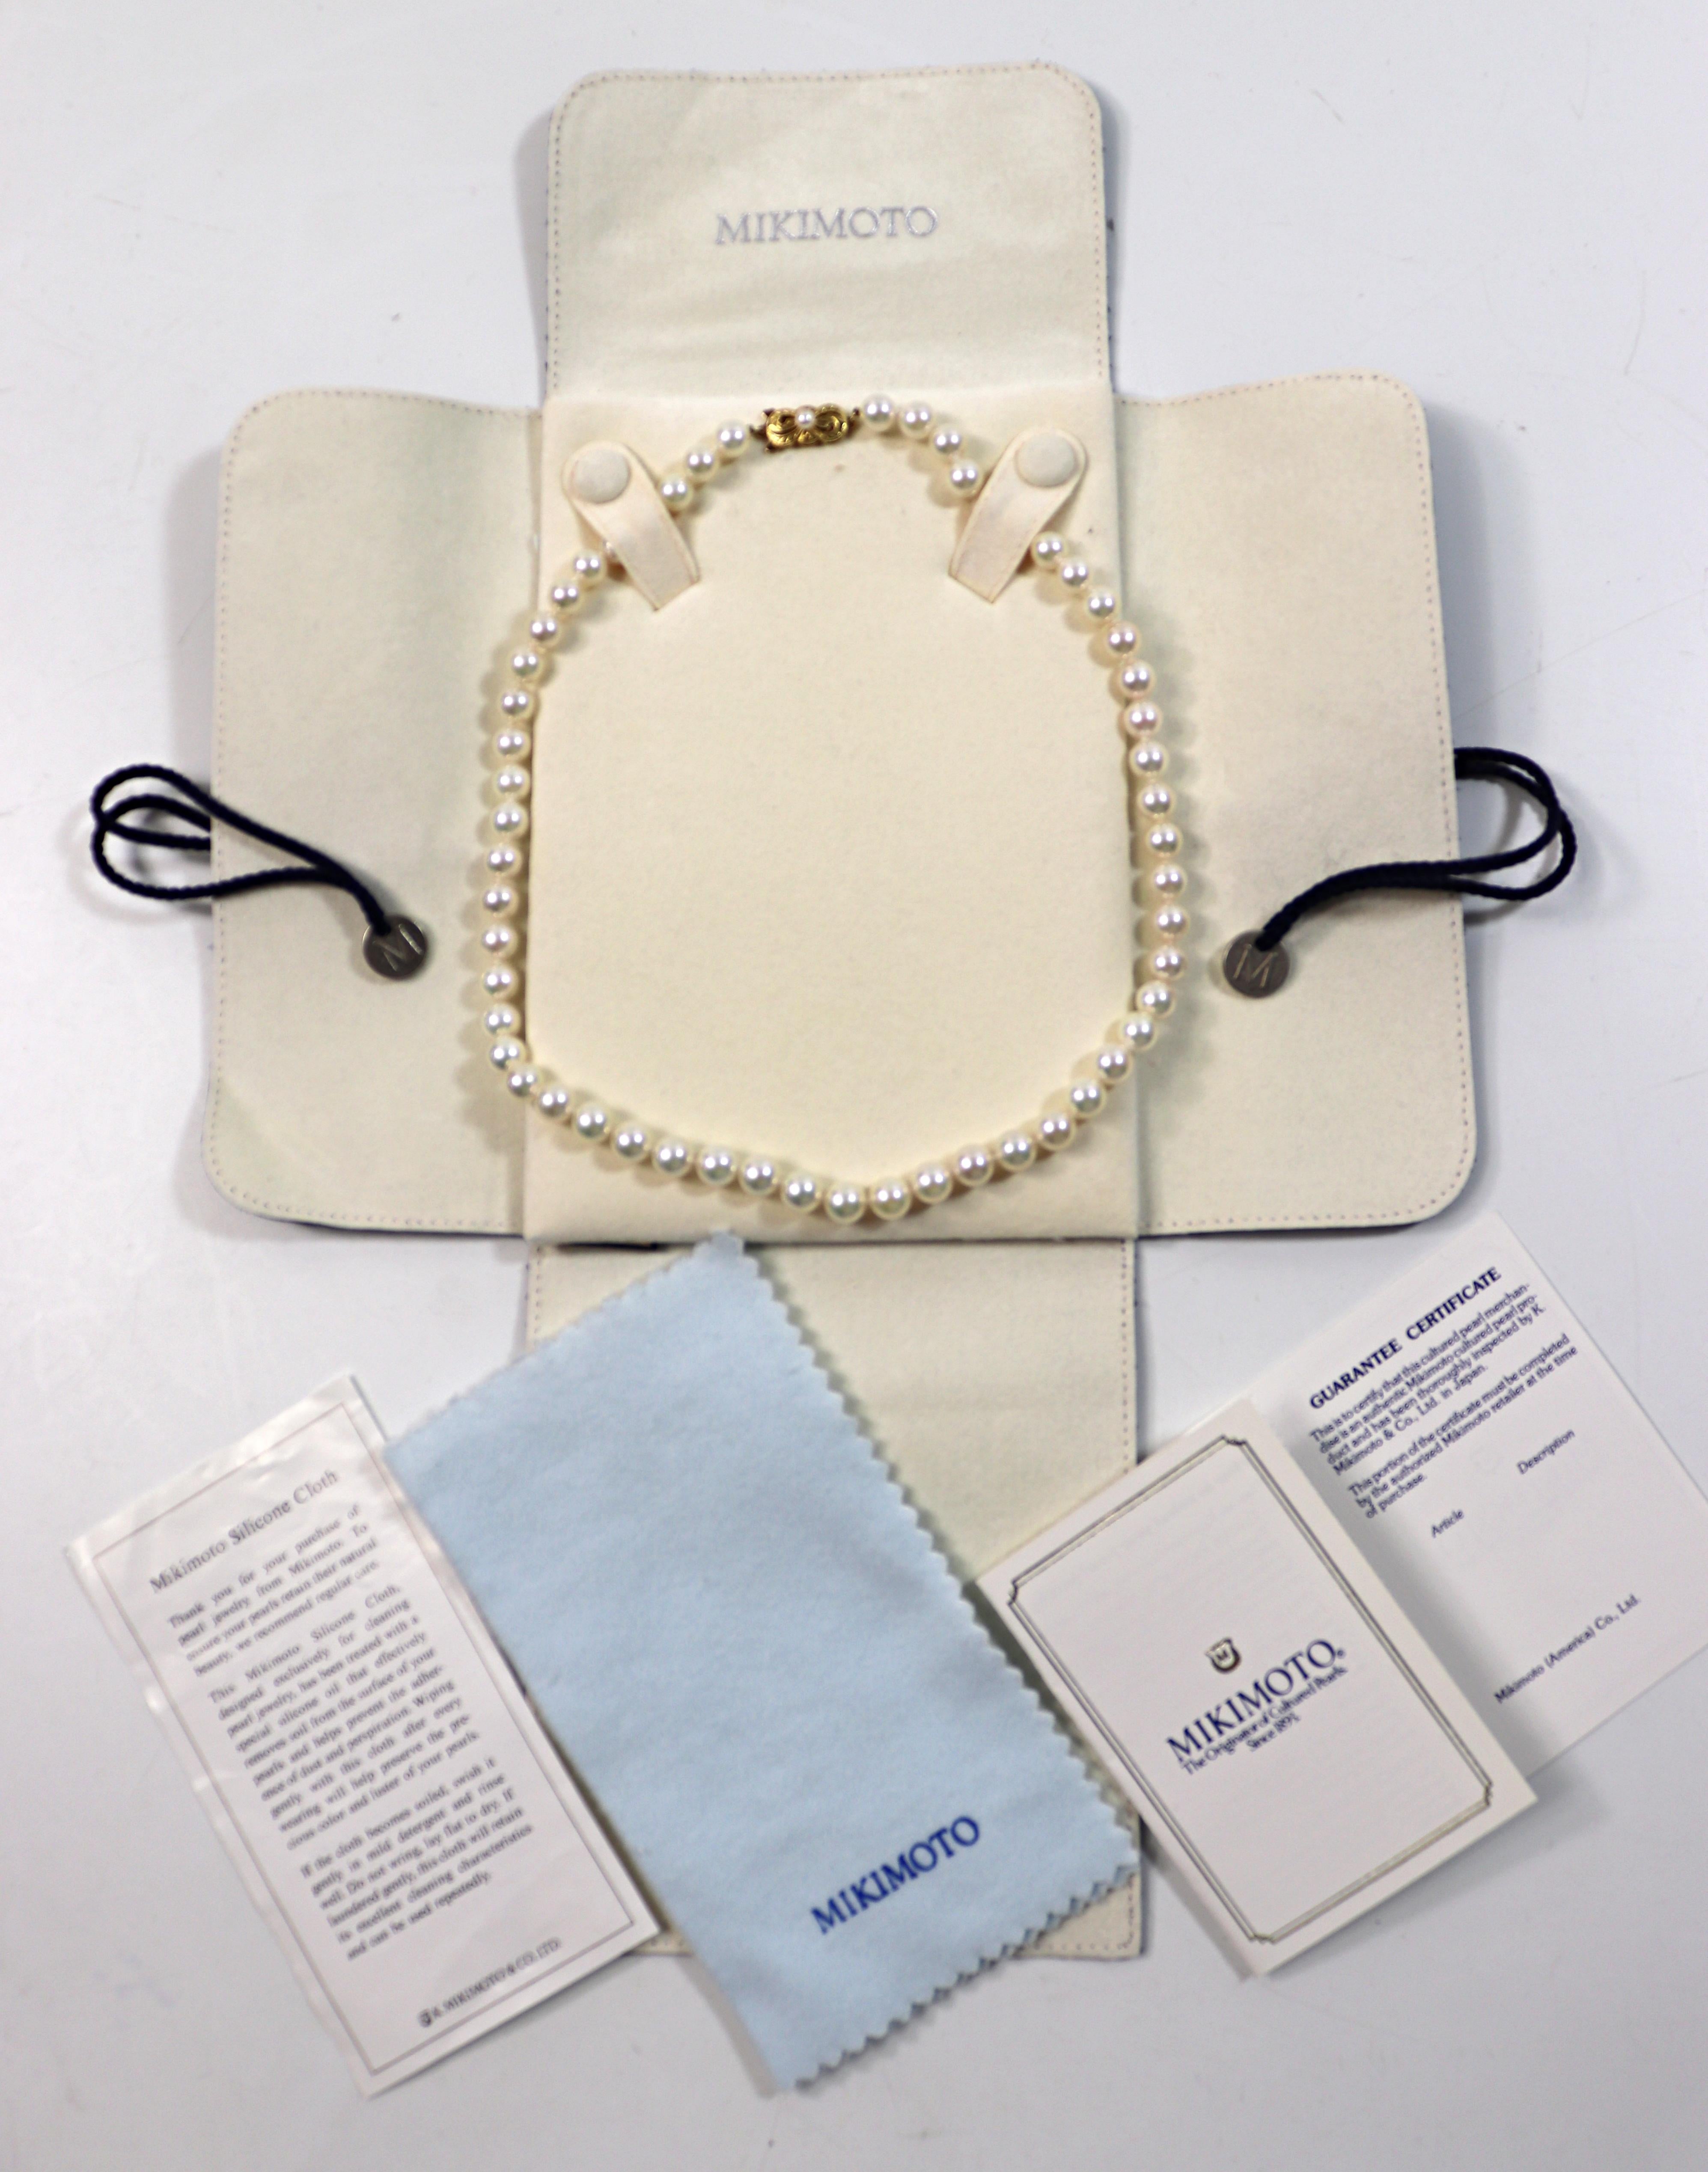 Featuring (55) 7.5 mm cultured Akoya pearls, completed by a 4.0 mm, cultured pearl, 18k yellow gold
Mikimoto clasp, forming an 18-inch knotted necklace, accompanied by the original blue Mikimoto
necklace envelope with tie, paperwork and cloth, Gross